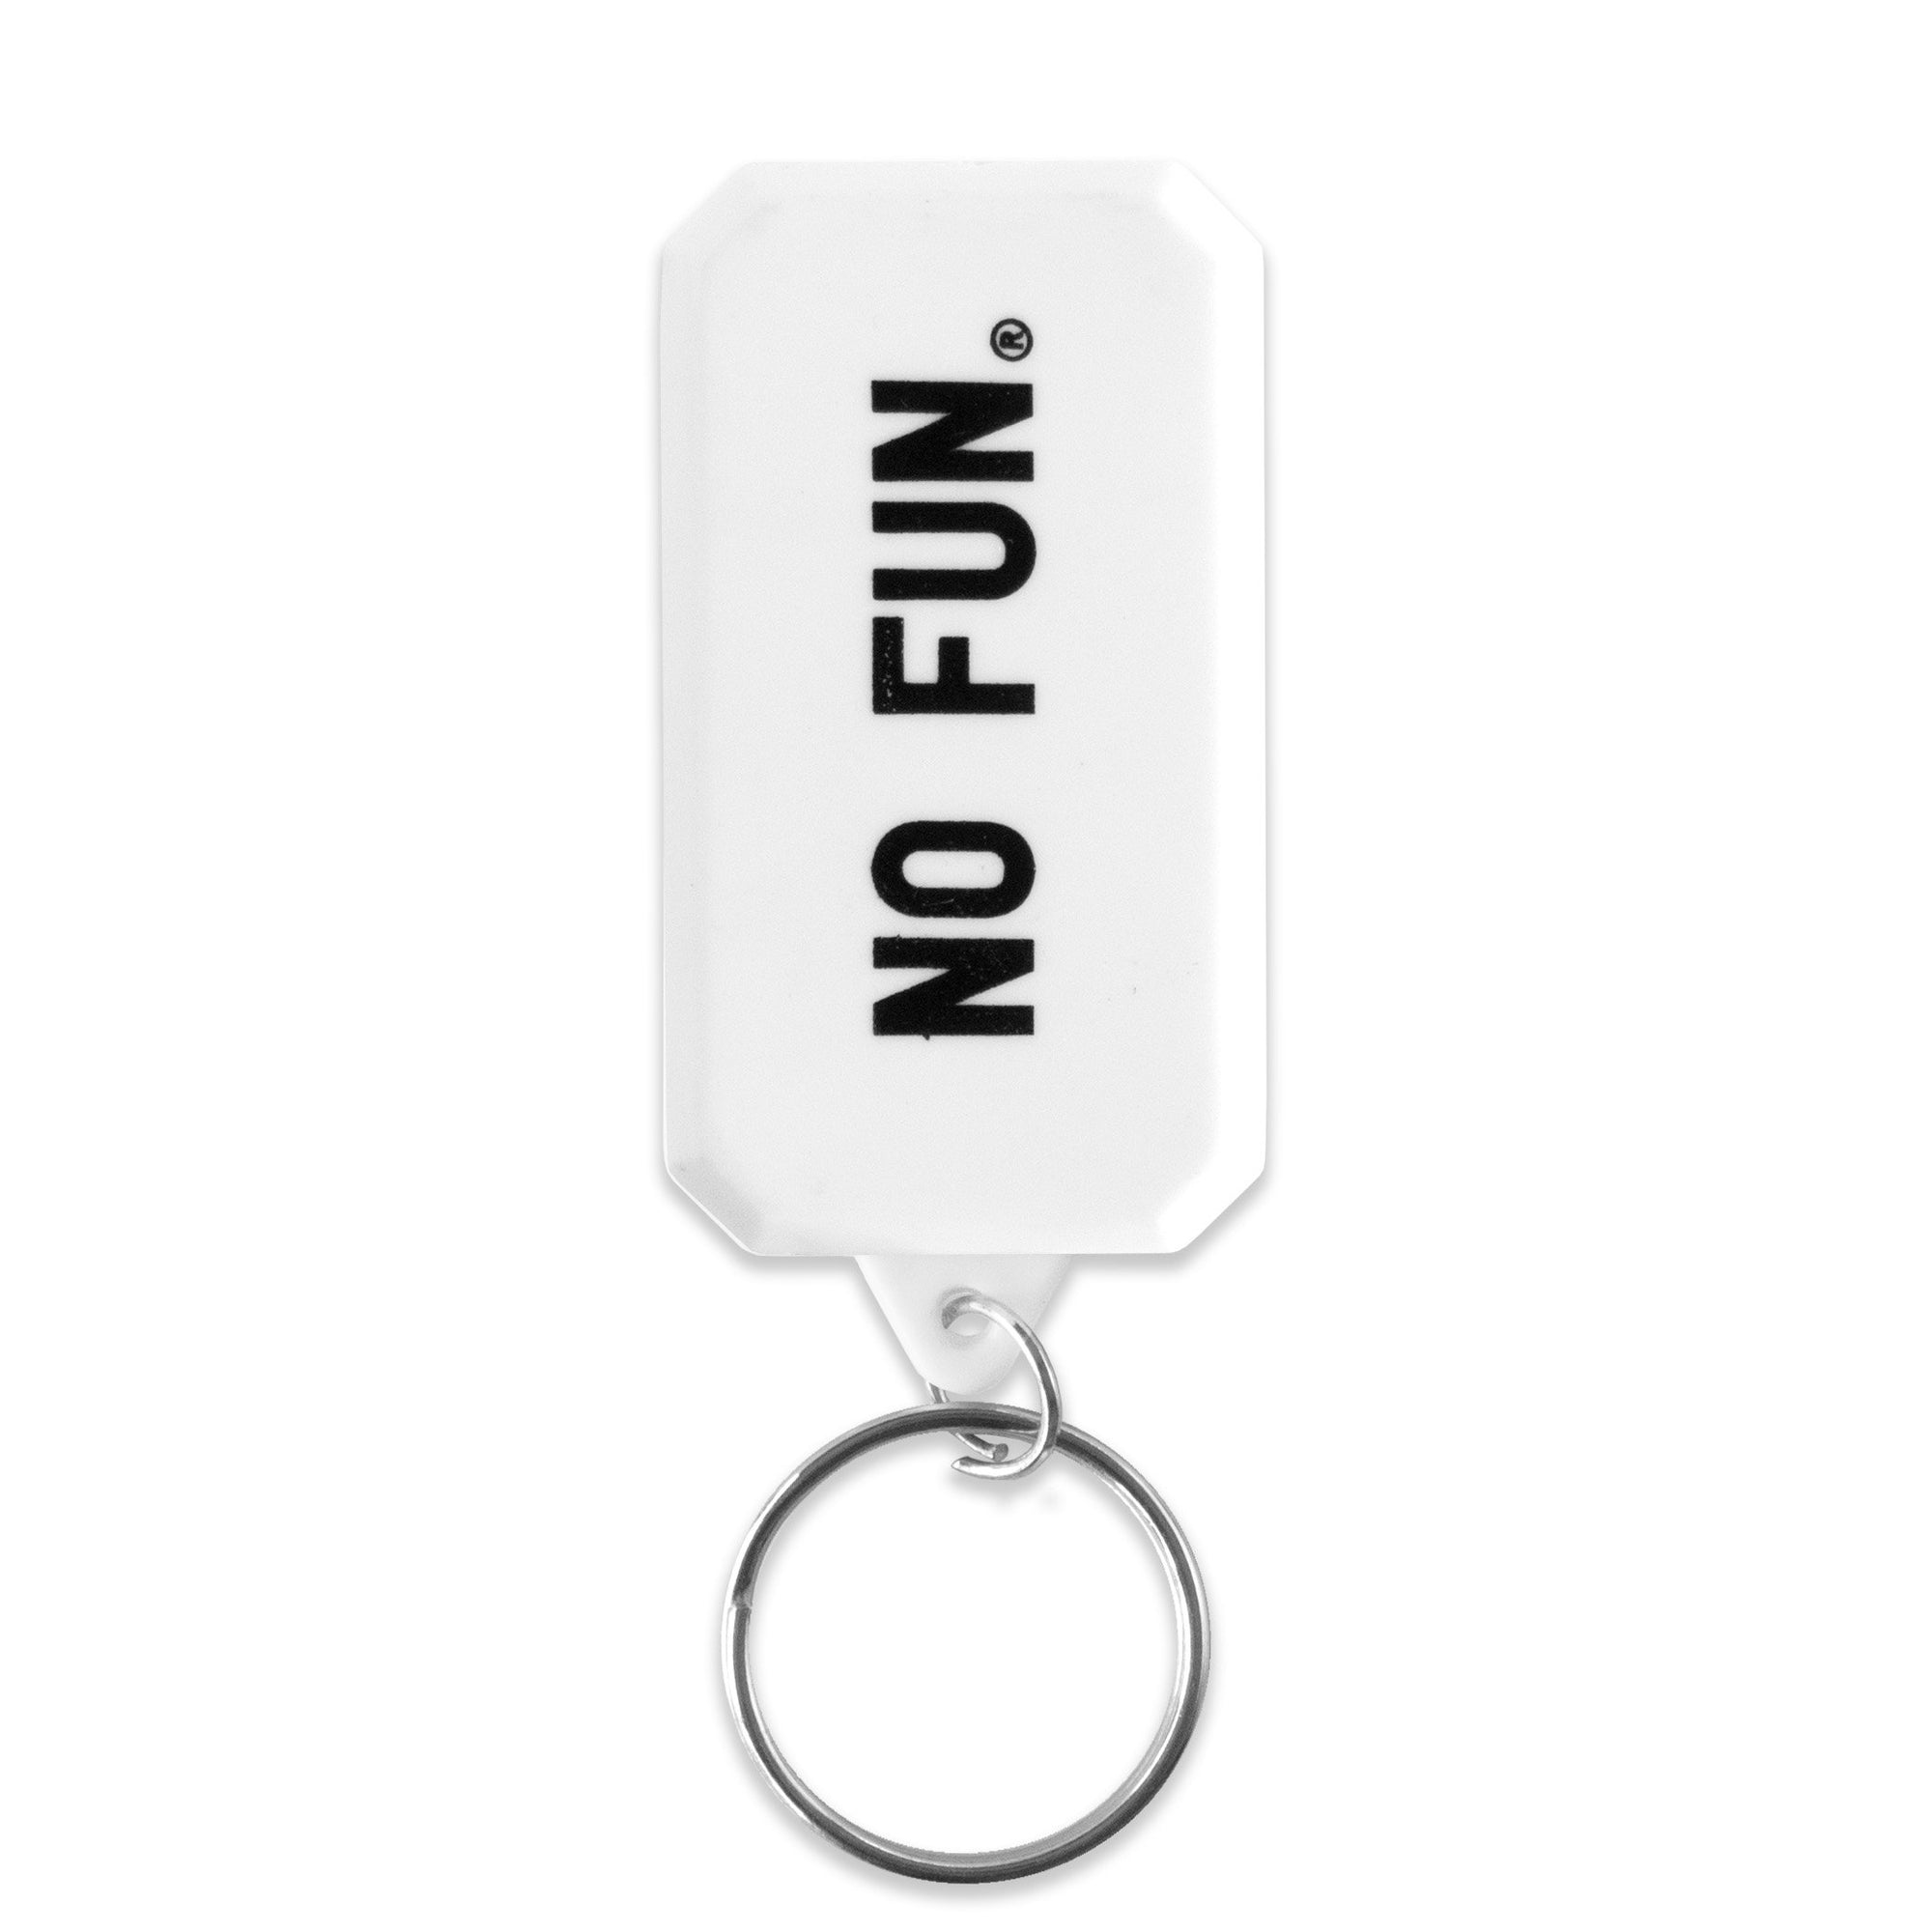 A photo of the backside of the compass keychain.  The "NO FUN®" logo is printed in black along the back.